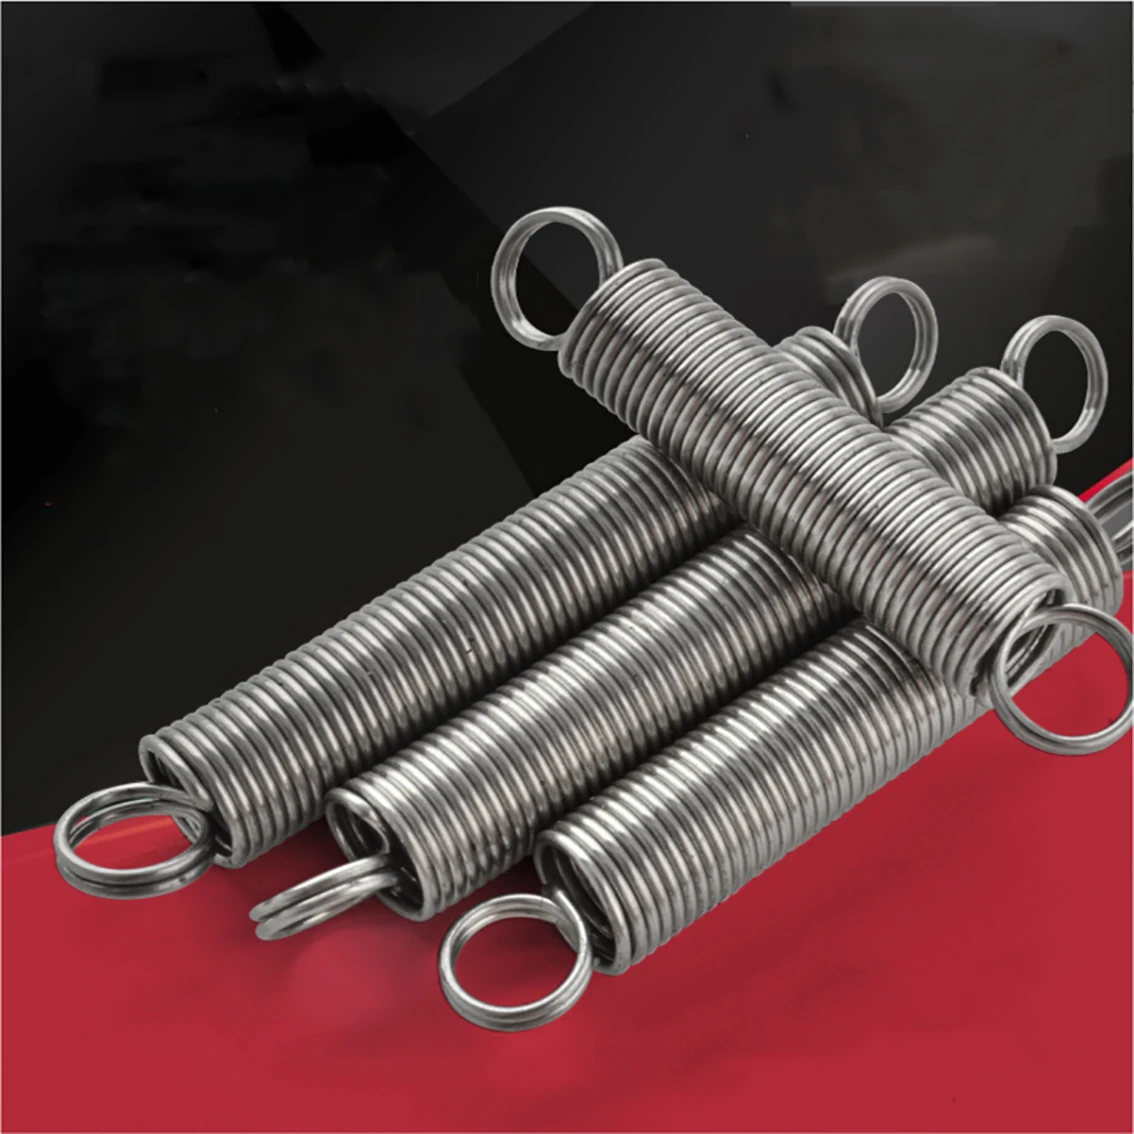 Multipurpose Springs 1Pcs Sping Steel Dual Hook Long Expansion Tension Spring Hardware Accessories Wire Dia 1mm Outer Dia 5-12mm Length 300mm Size : 1 x 12 x 300mm 